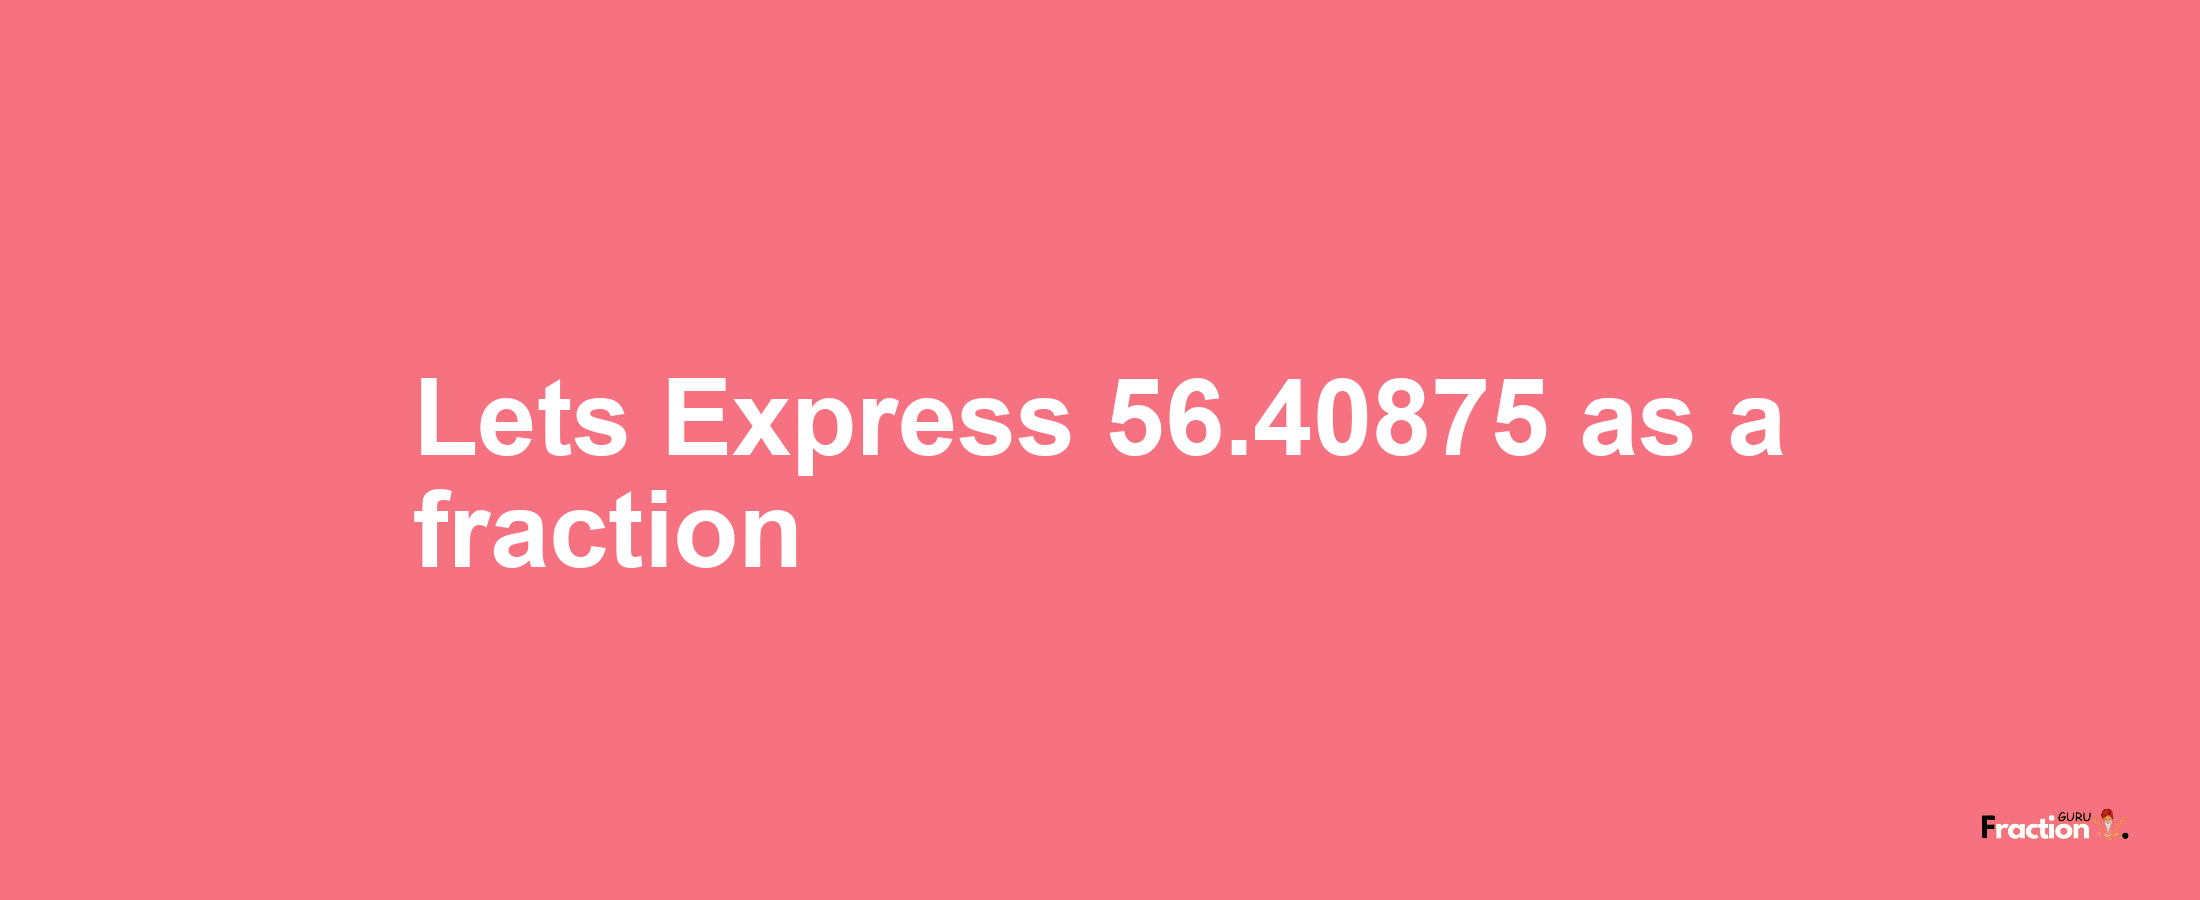 Lets Express 56.40875 as afraction